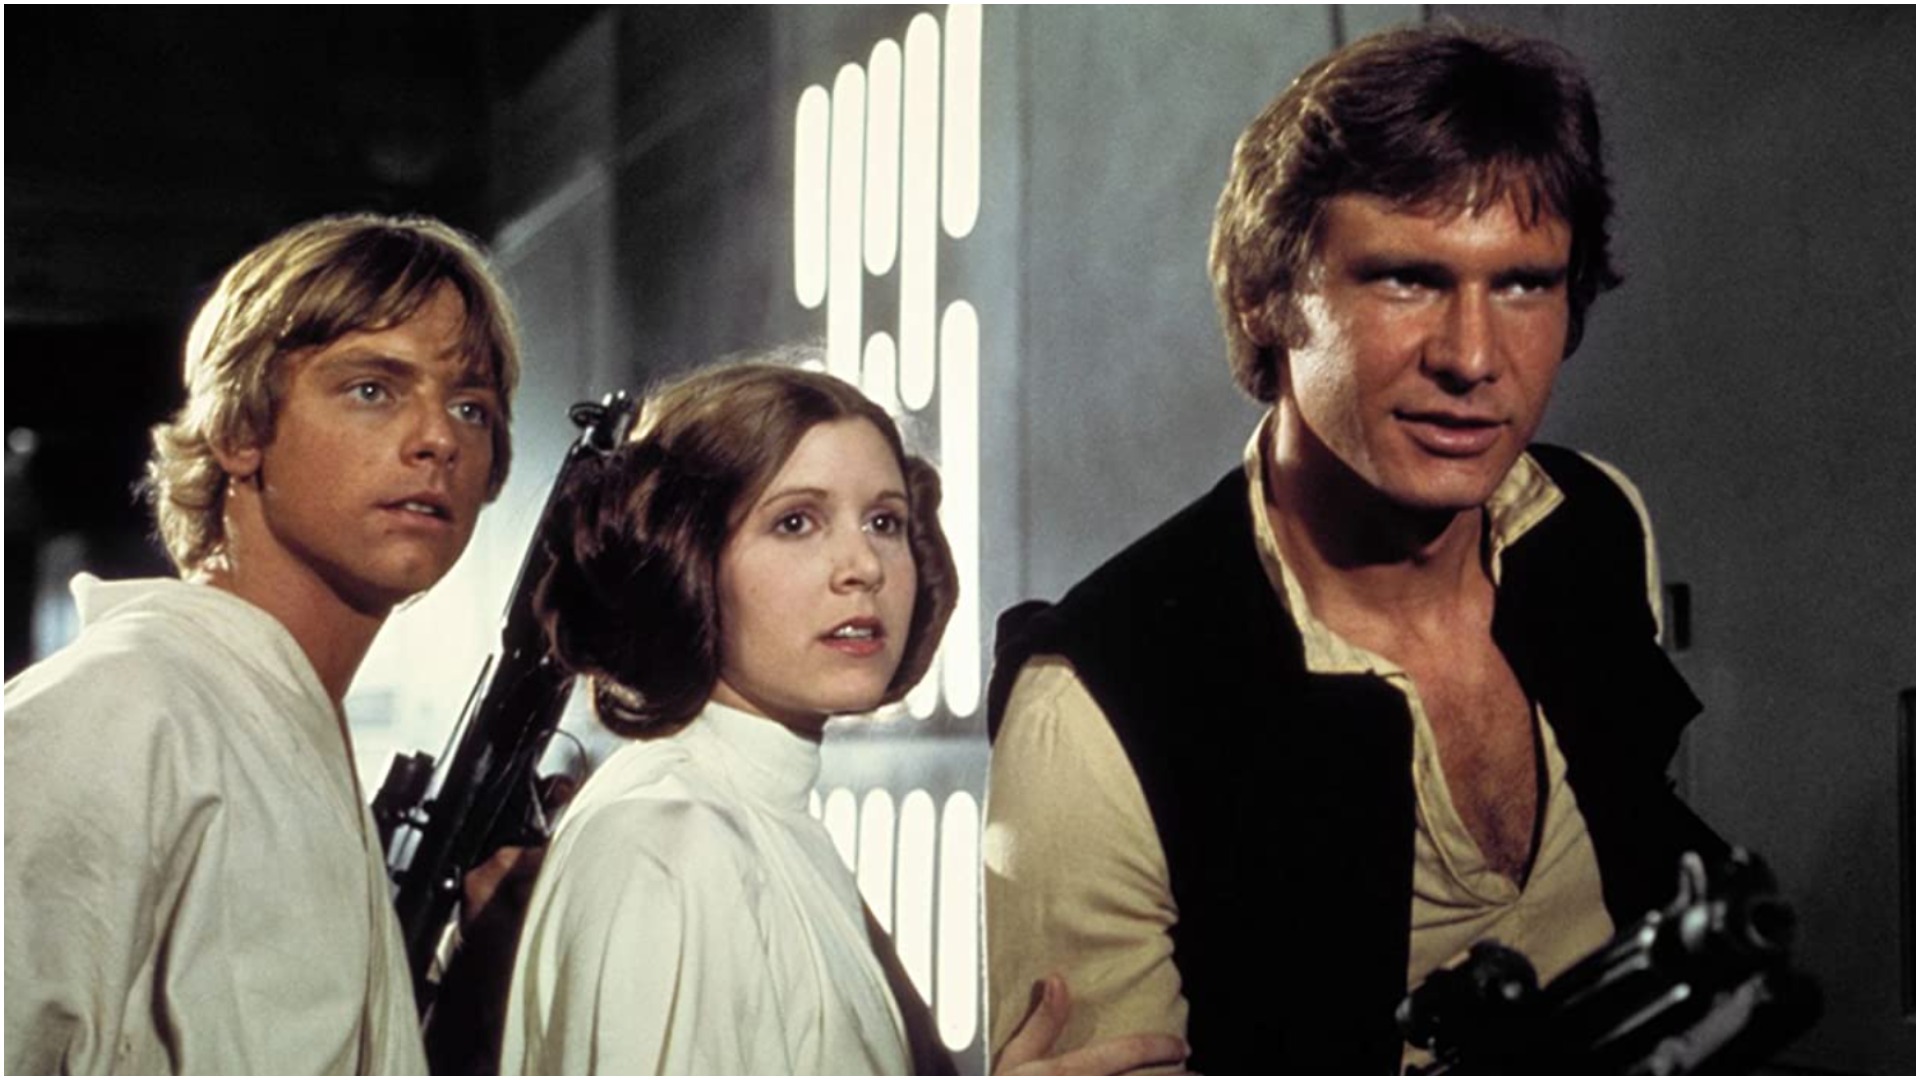 Star Wars: 33 stories from the making of the Skywalker Saga you may not know